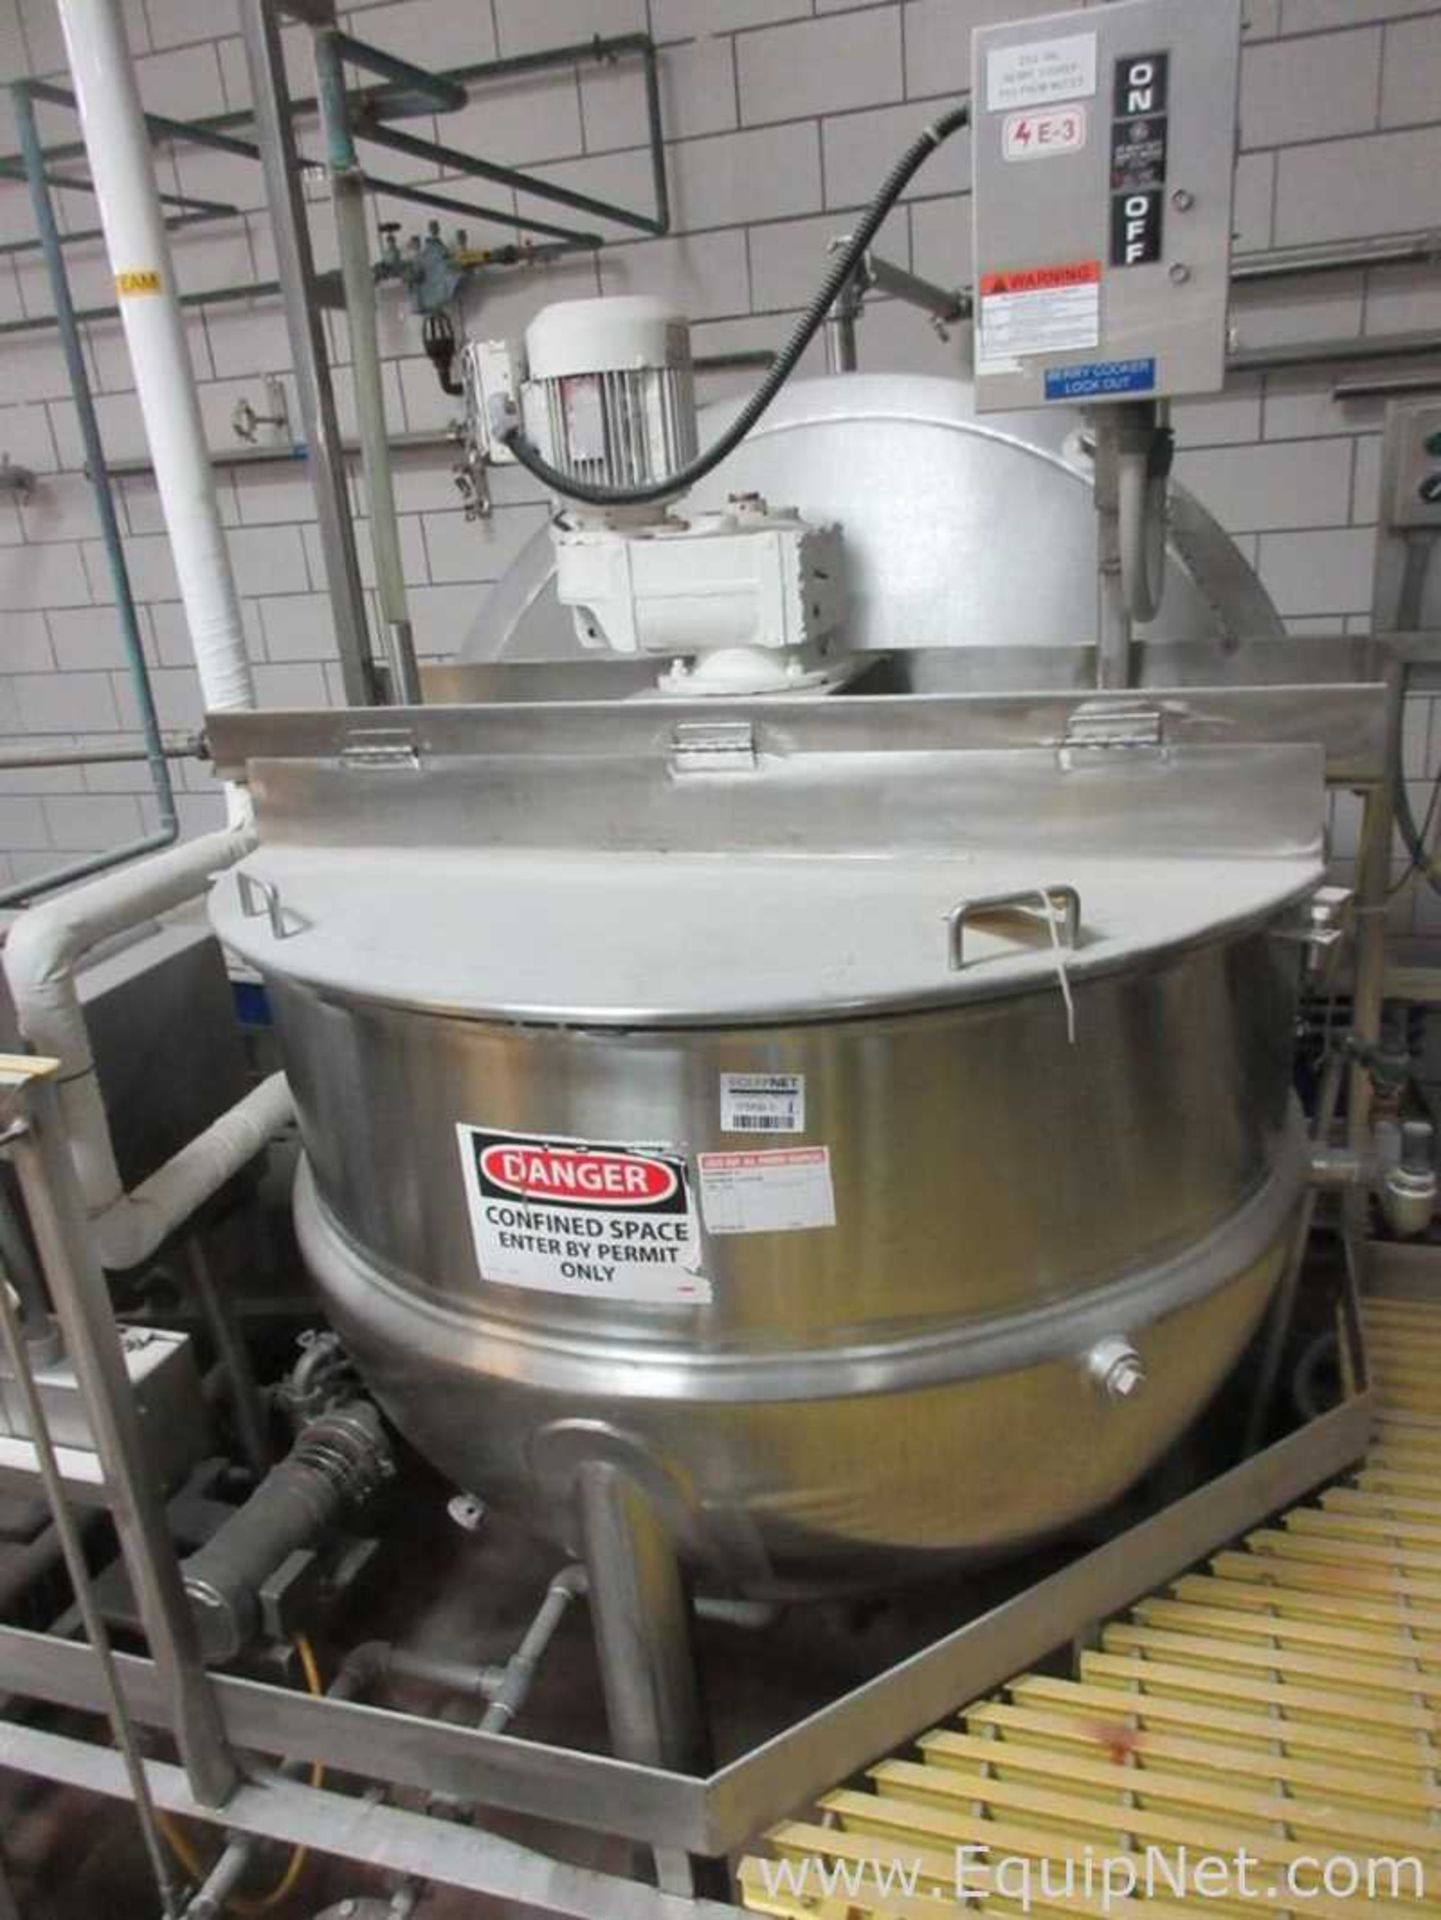 250 Gallon Lee Jacketed Sanitary Stainless Steel Kettle With Sweep Agitator